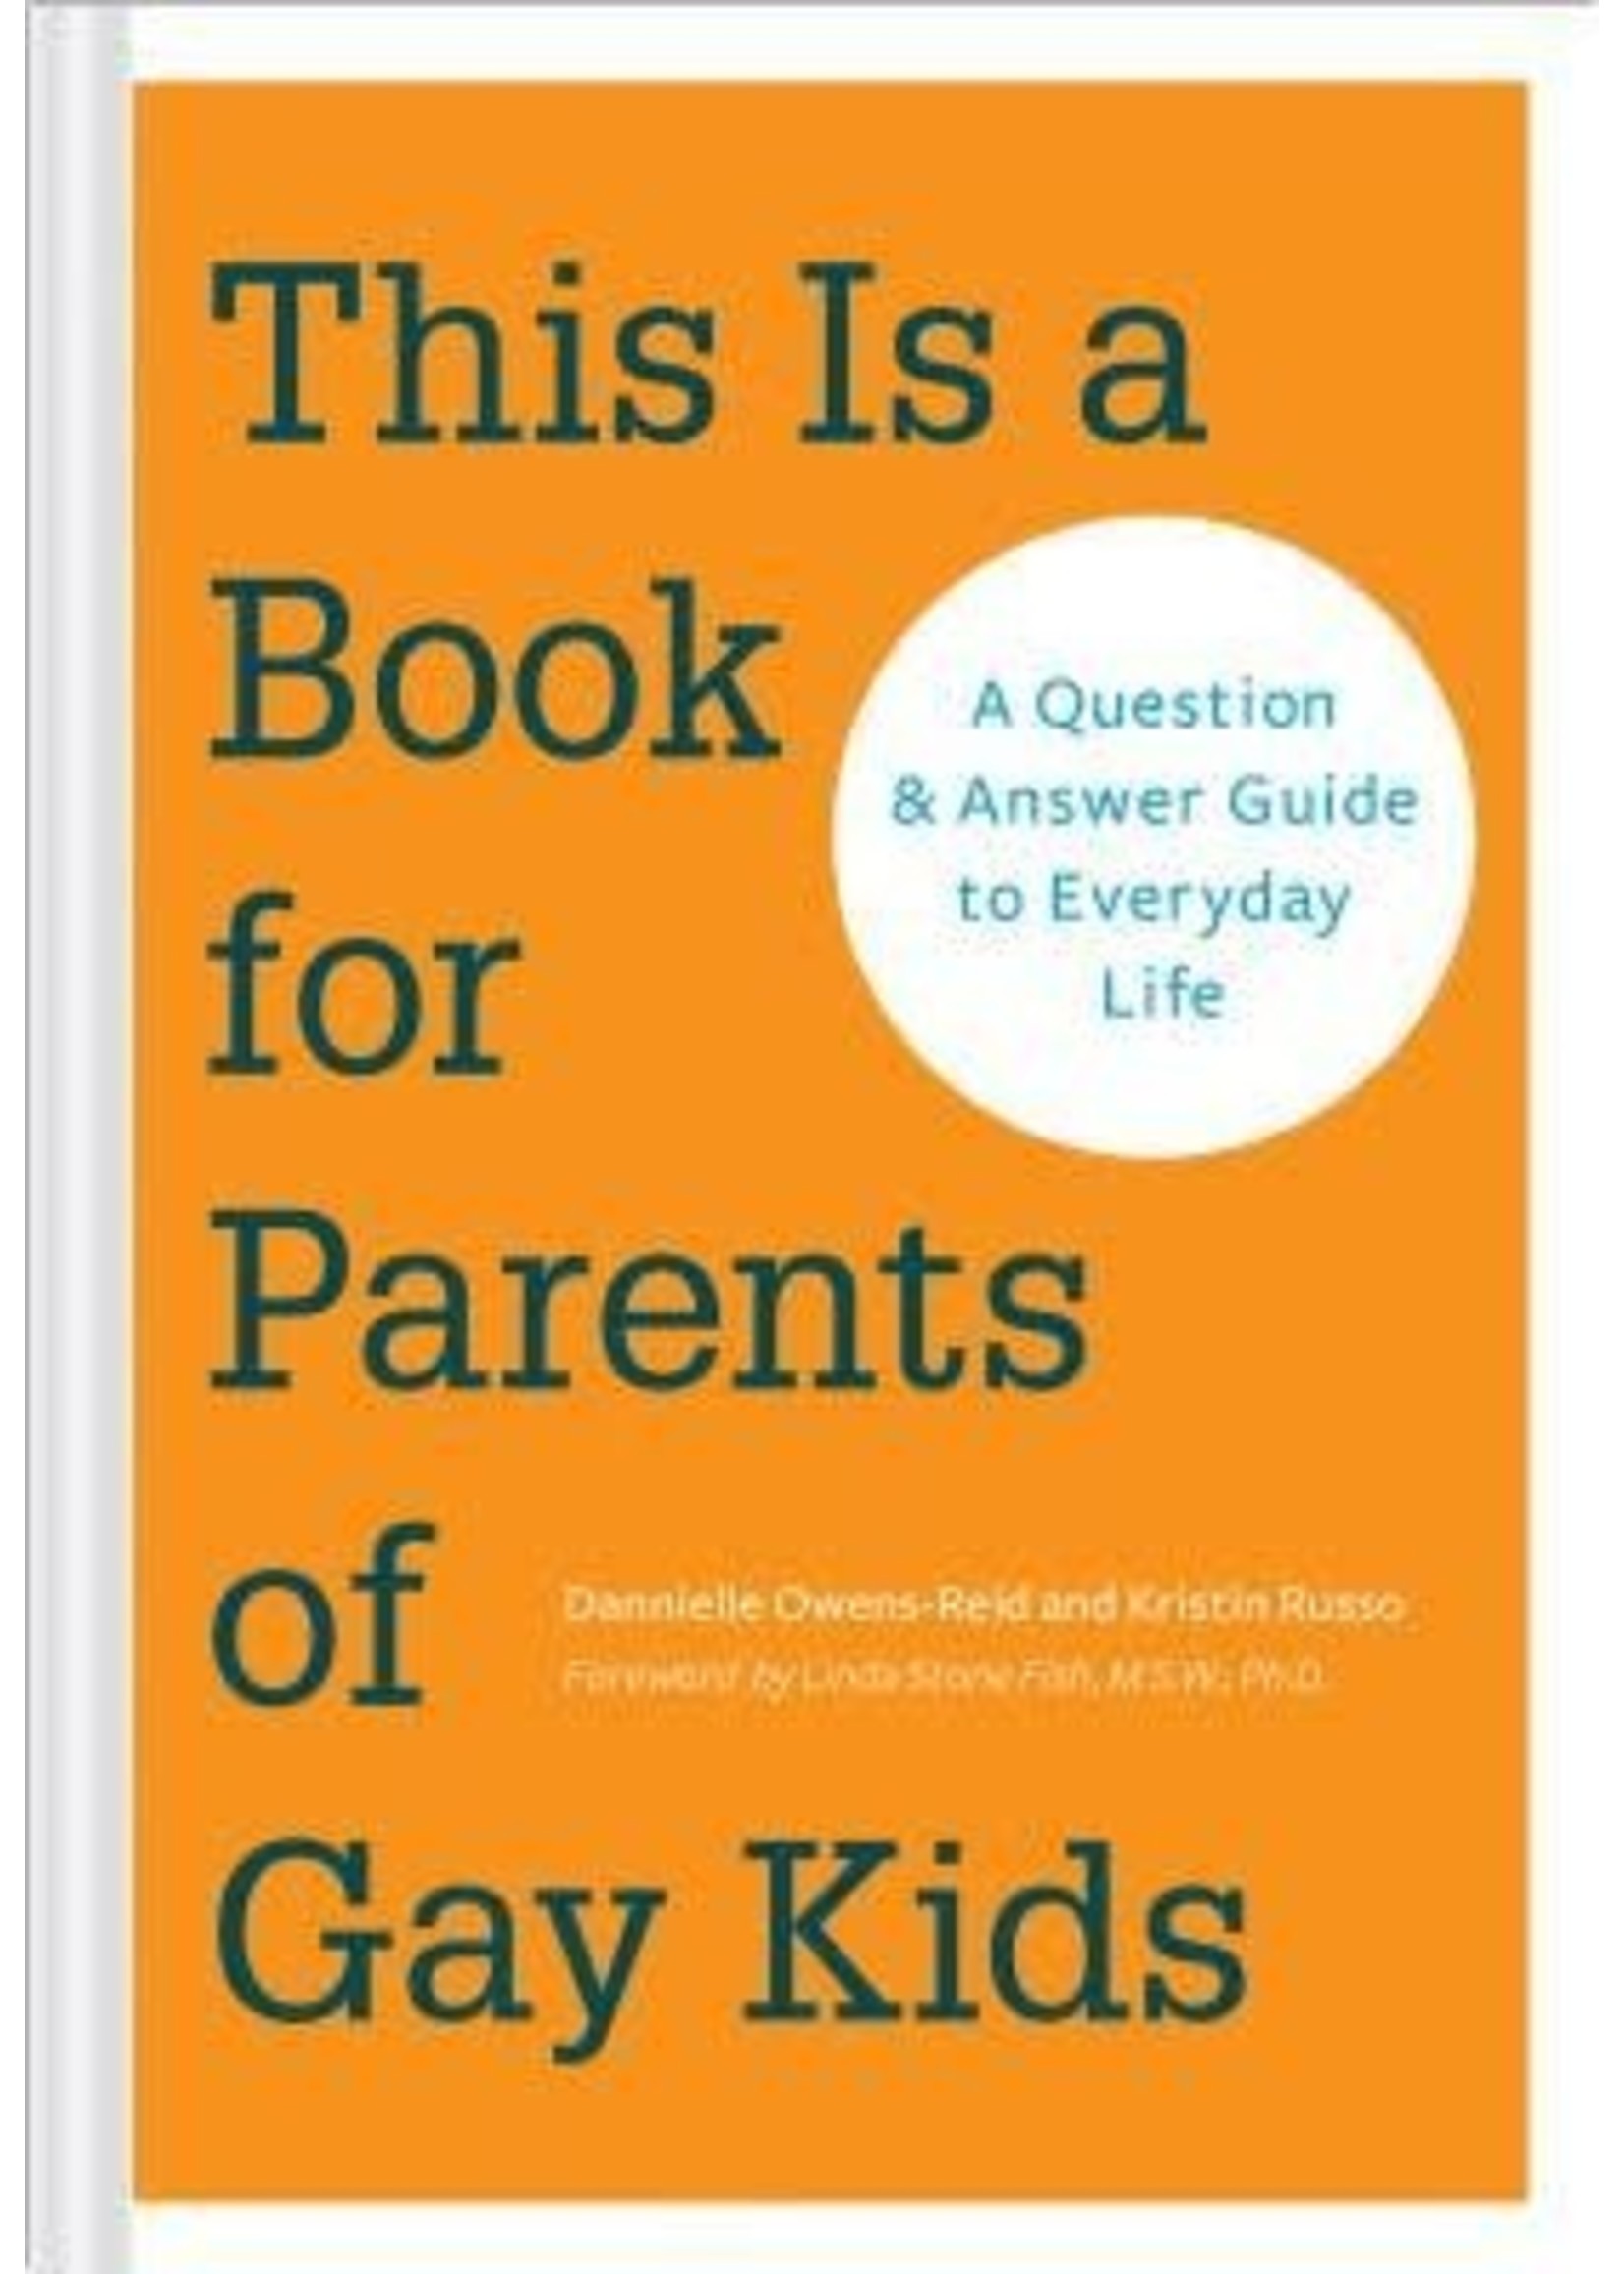 This Is a Book for Parents of Gay Kids: A Question Answer Guide to Everyday Life by Dannielle Owens-Reid